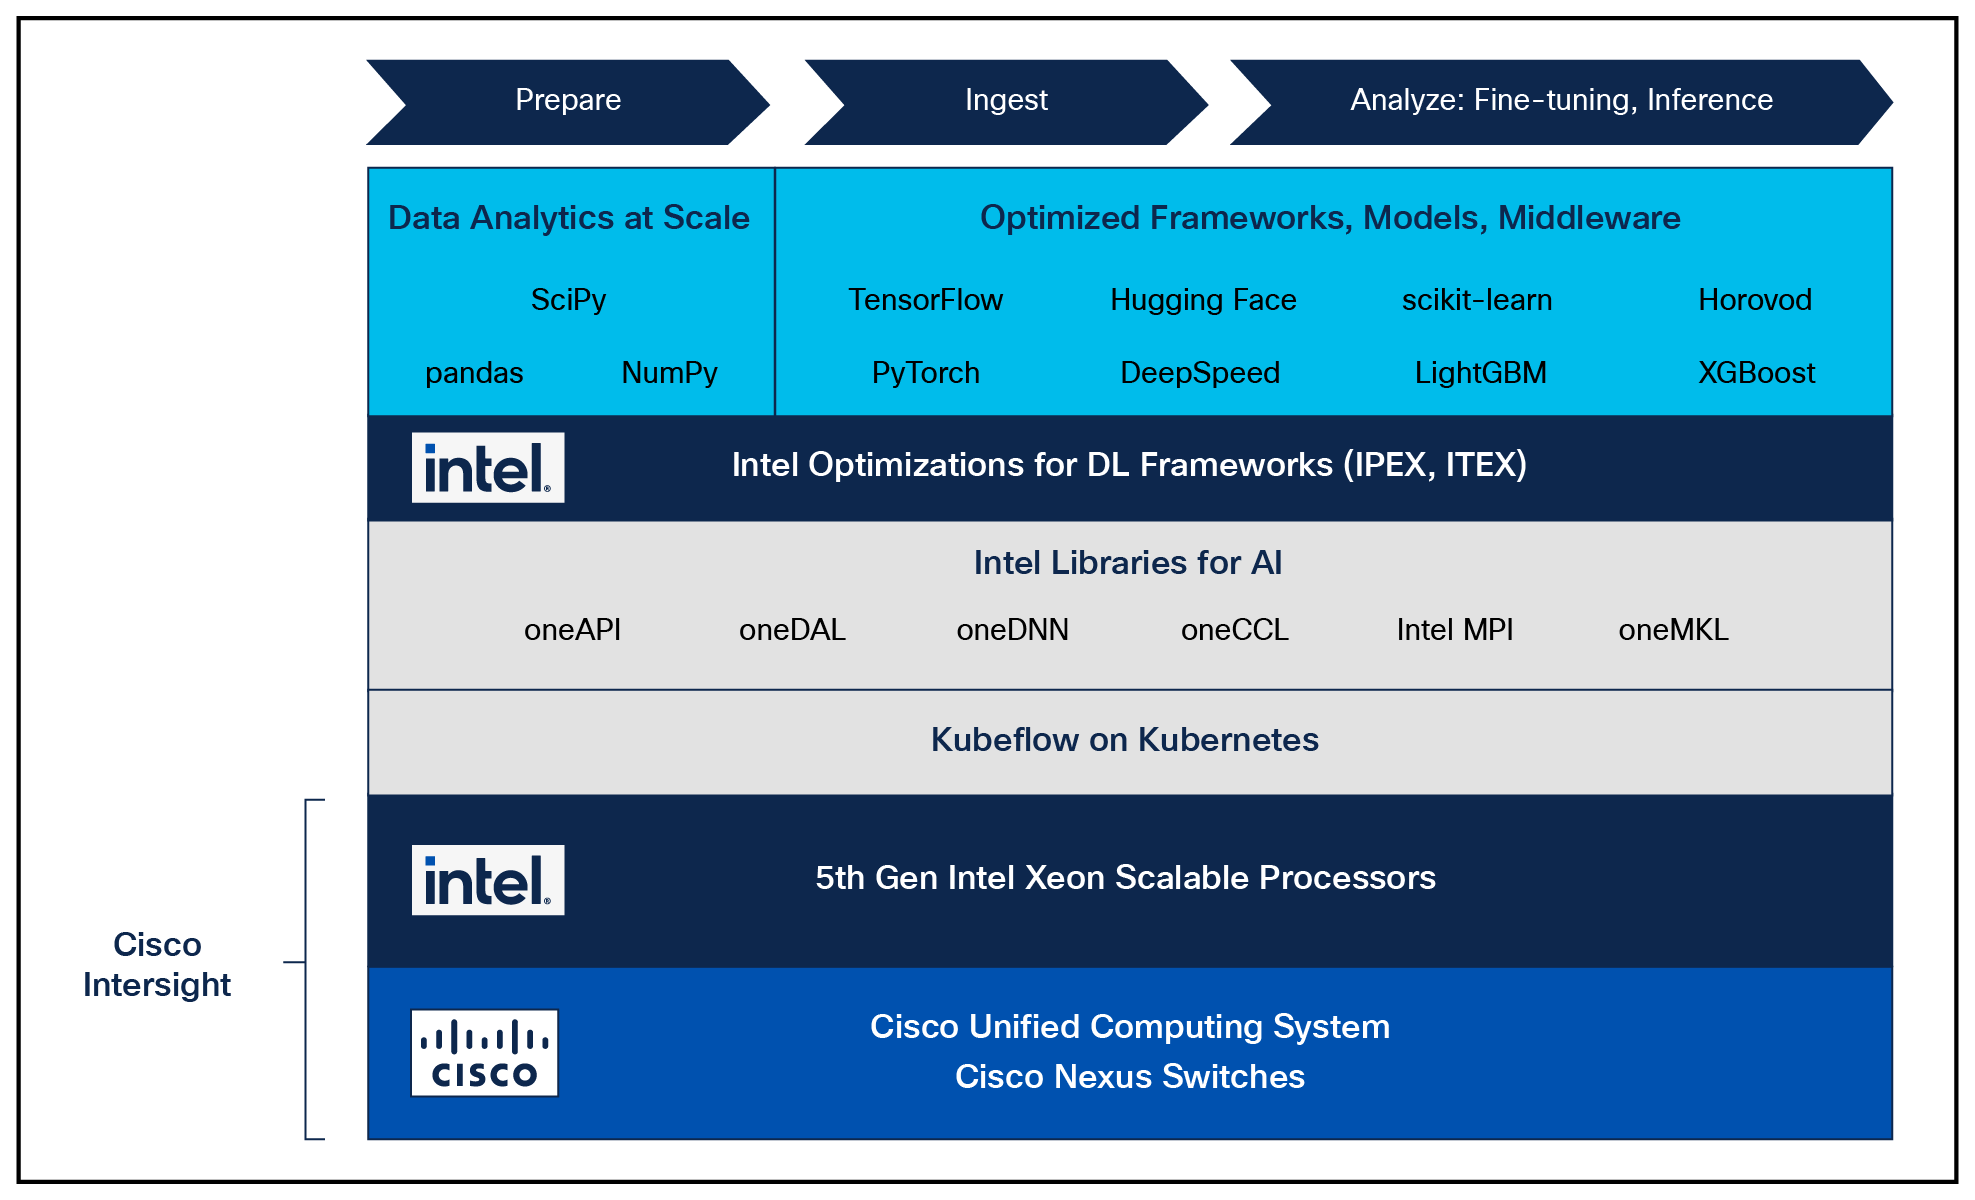 Reference architecture for deploying Generative AI on Cisco UCS with 5th Gen Intel Xeon processors